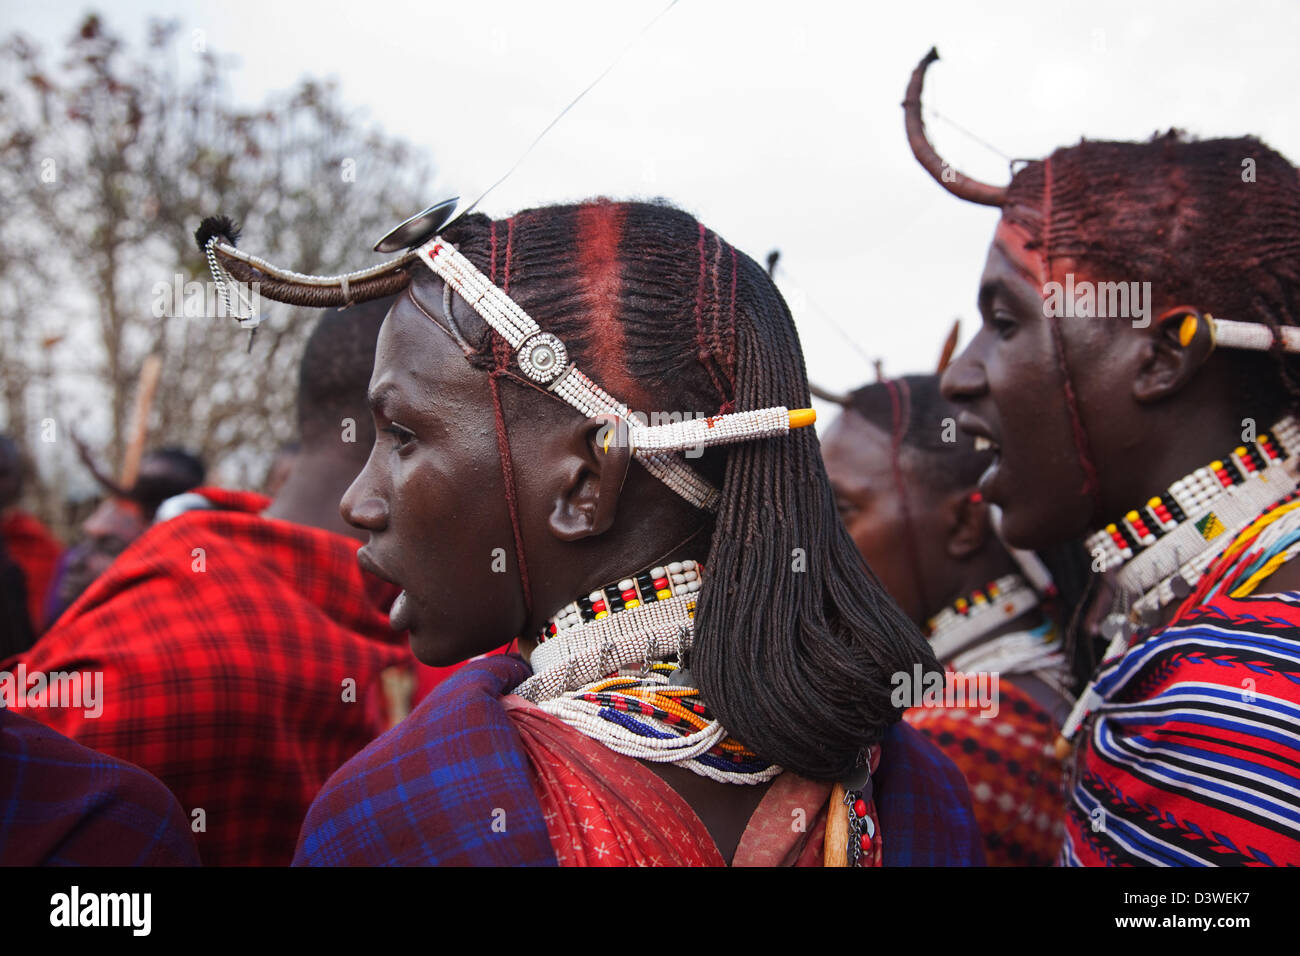 Young maasai men with beads, red shukas and plaited hair dance the traditional jump dance adumu at a wedding party. Stock Photo